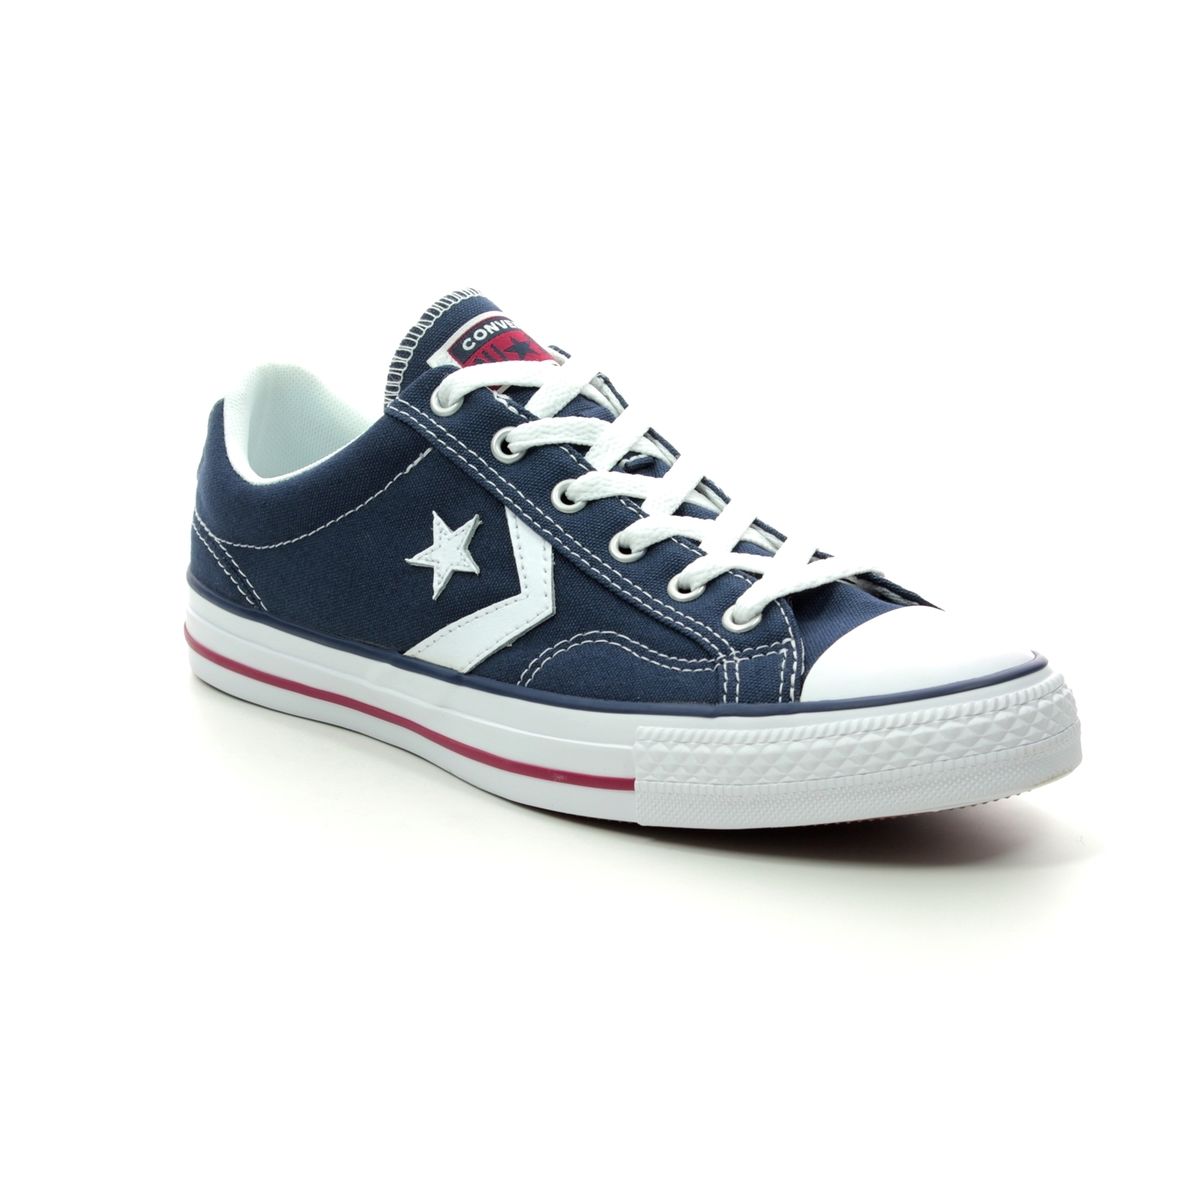 converse star player ox leather